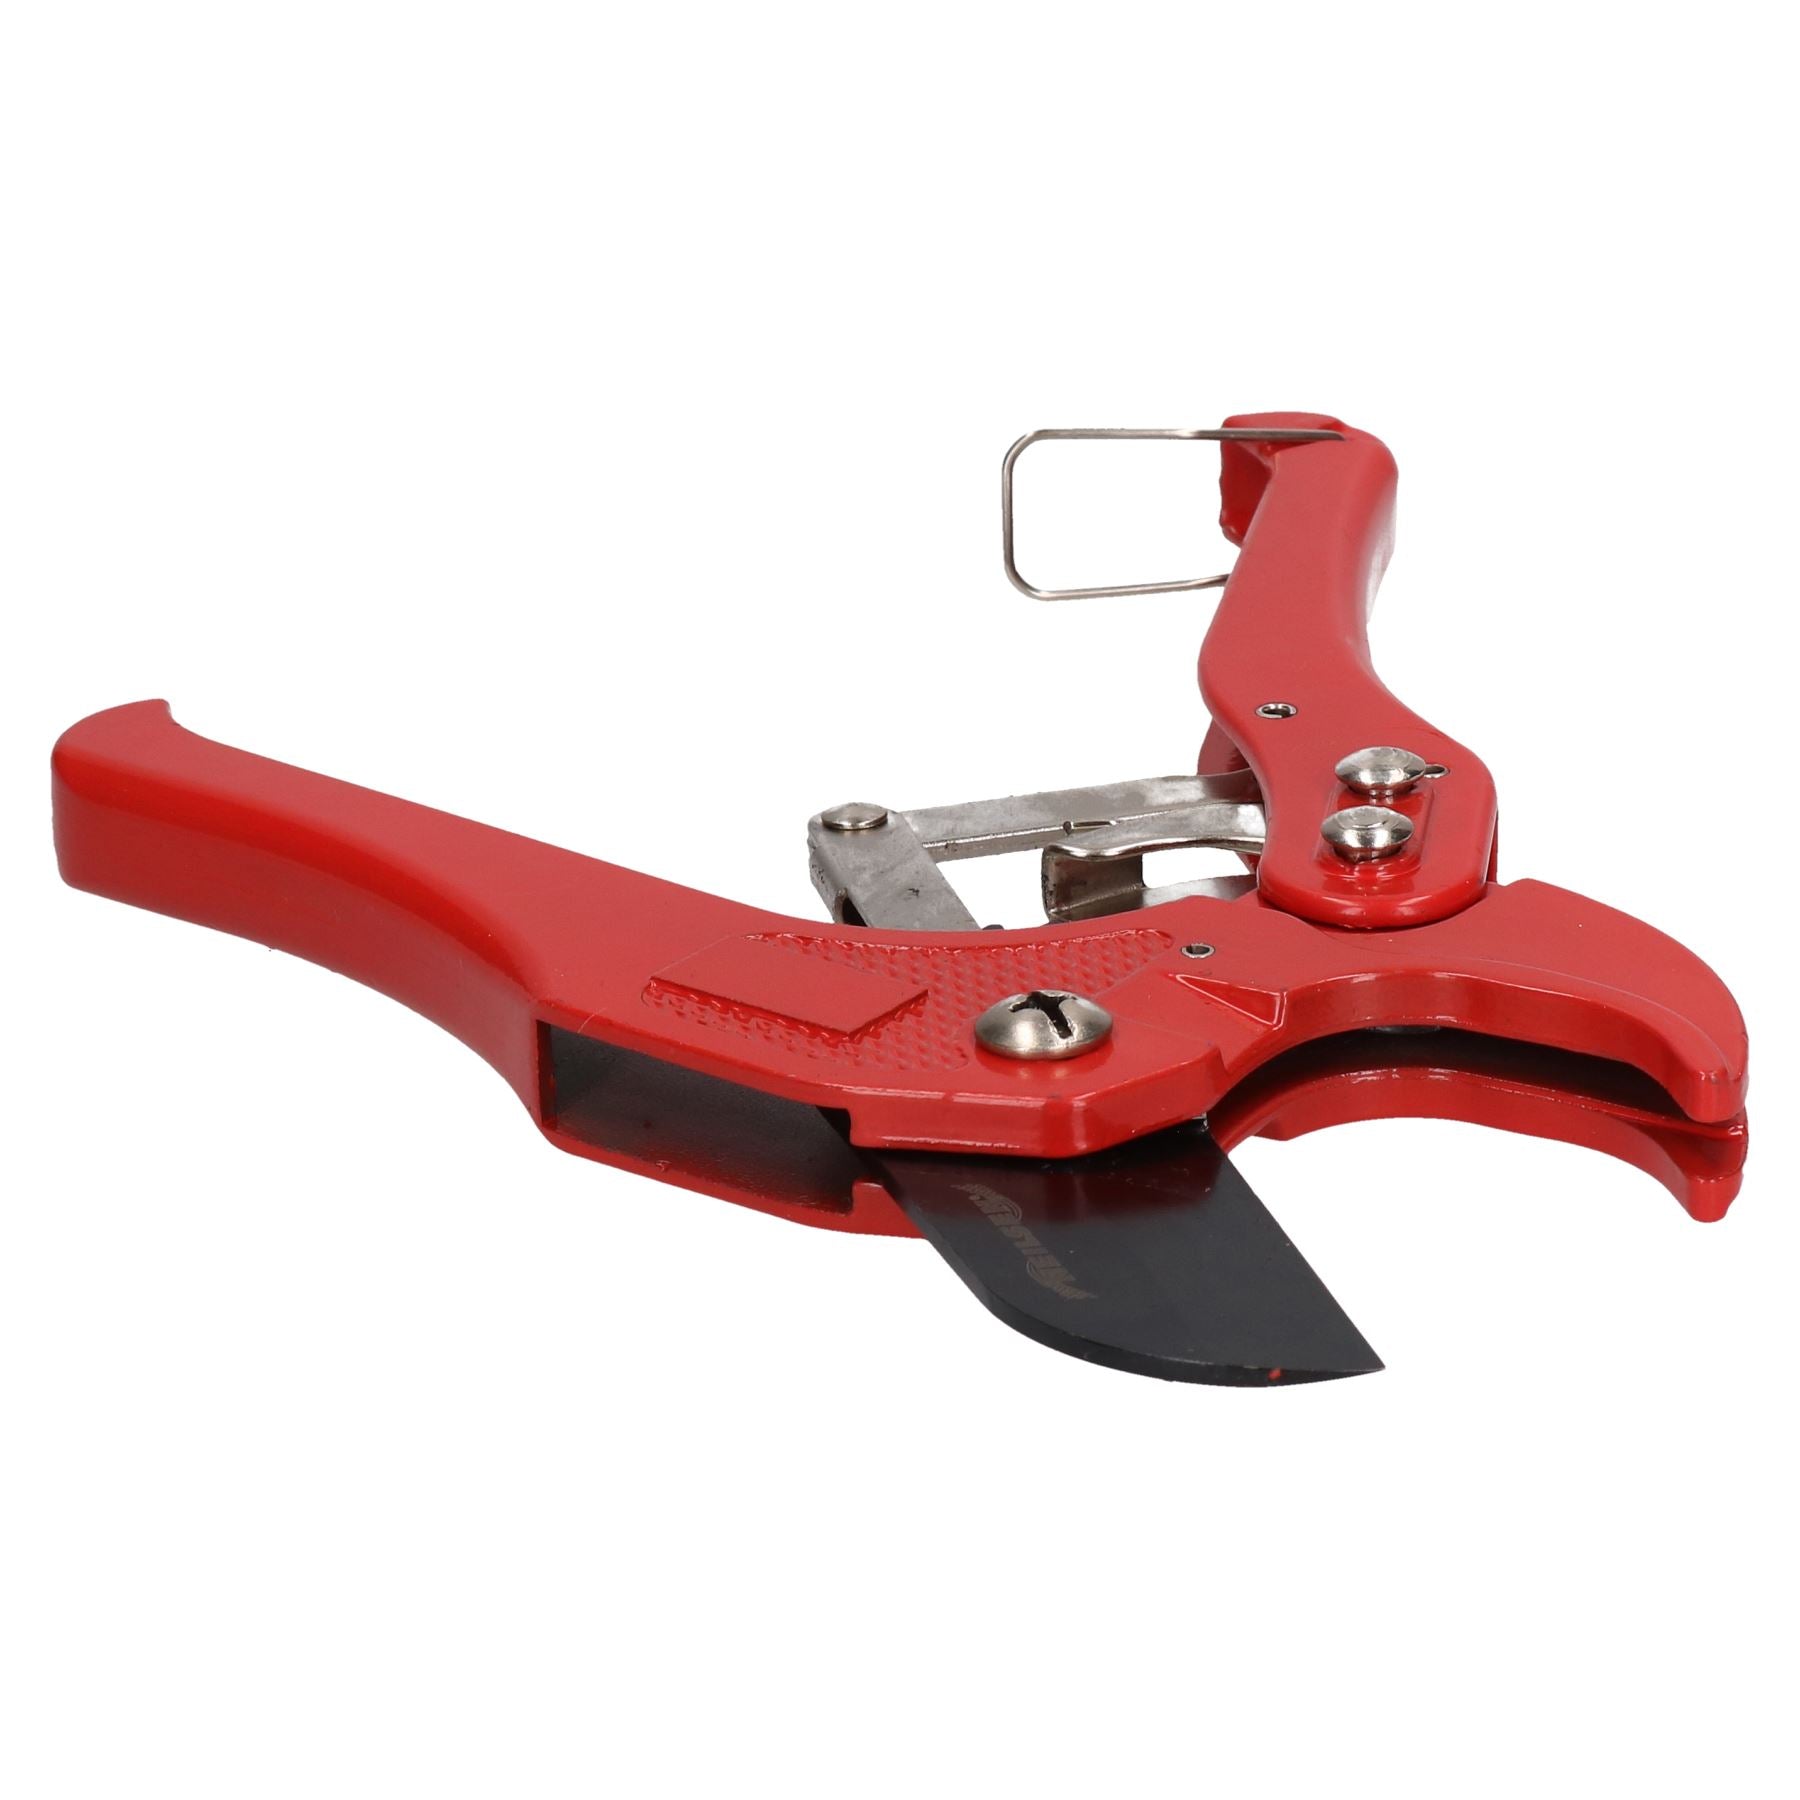 Ratcheting Plastic PVC Tube Cutter For Pipes Up To 42mm Plumbing Cutting Tool